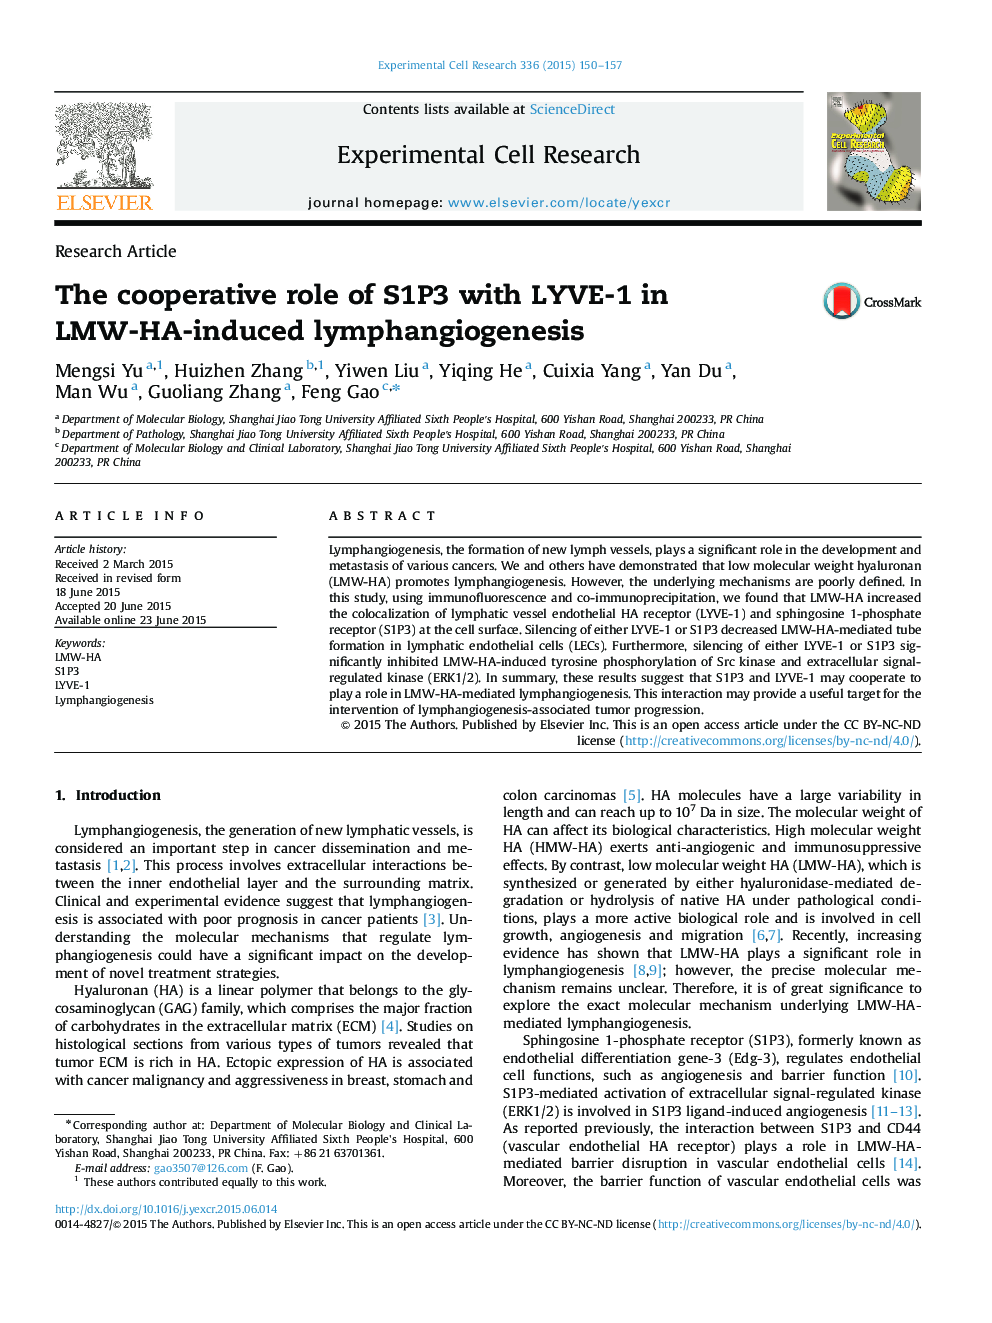 The cooperative role of S1P3 with LYVE-1 in LMW-HA-induced lymphangiogenesis